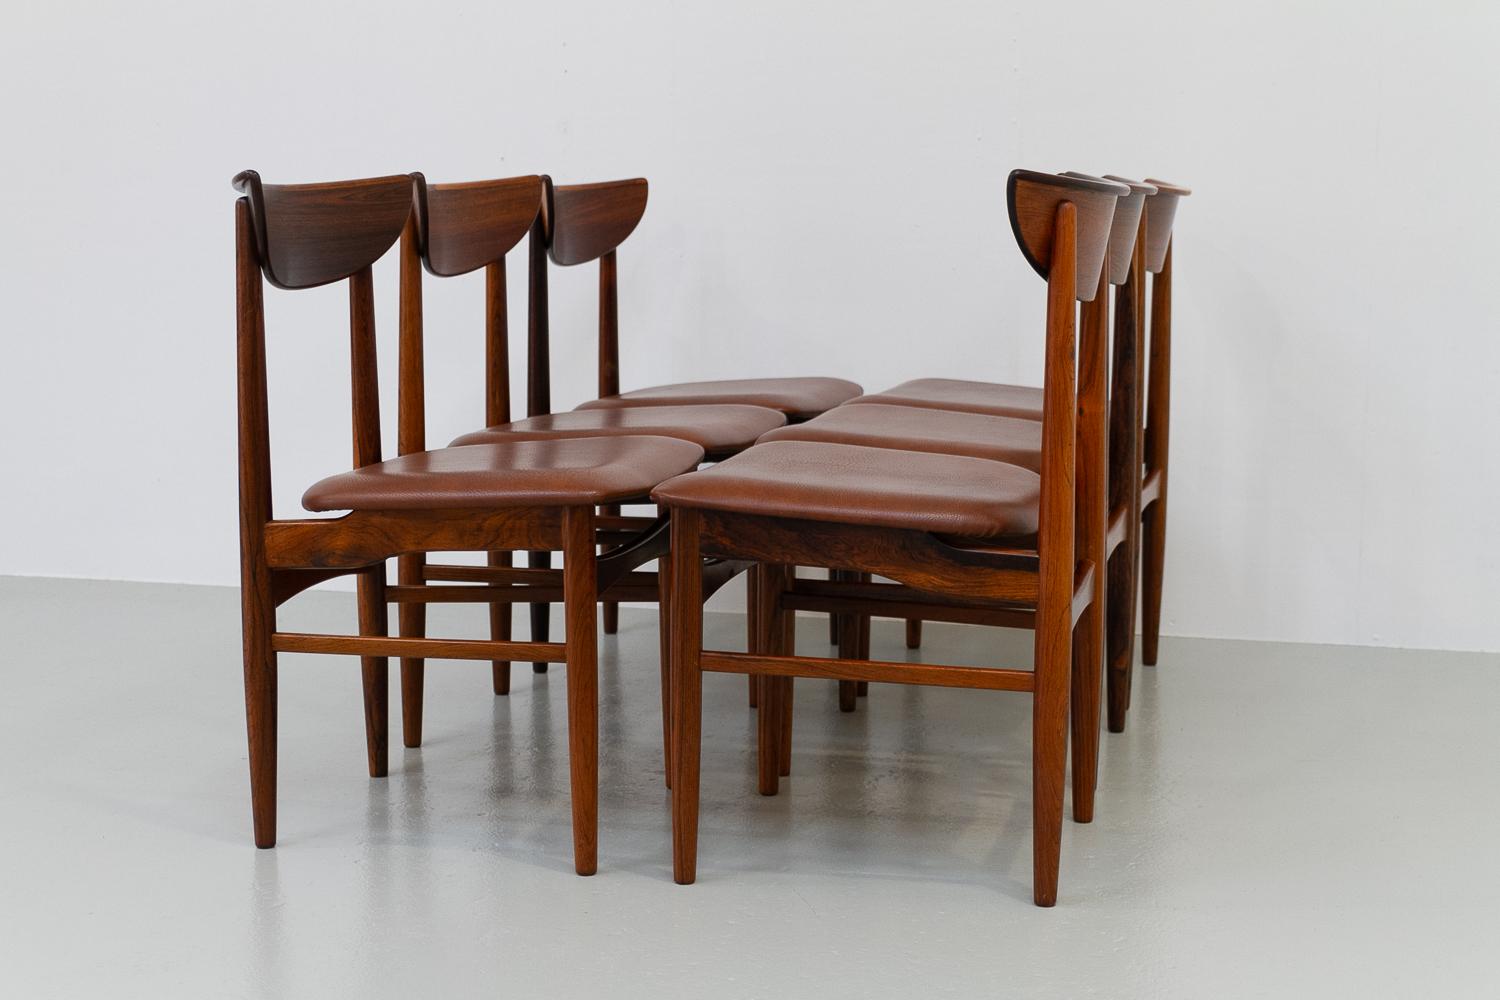 Vintage Danish Rosewood Dining Chairs by E.W. Bach for Skovby, 1960s. Set of 6. For Sale 7